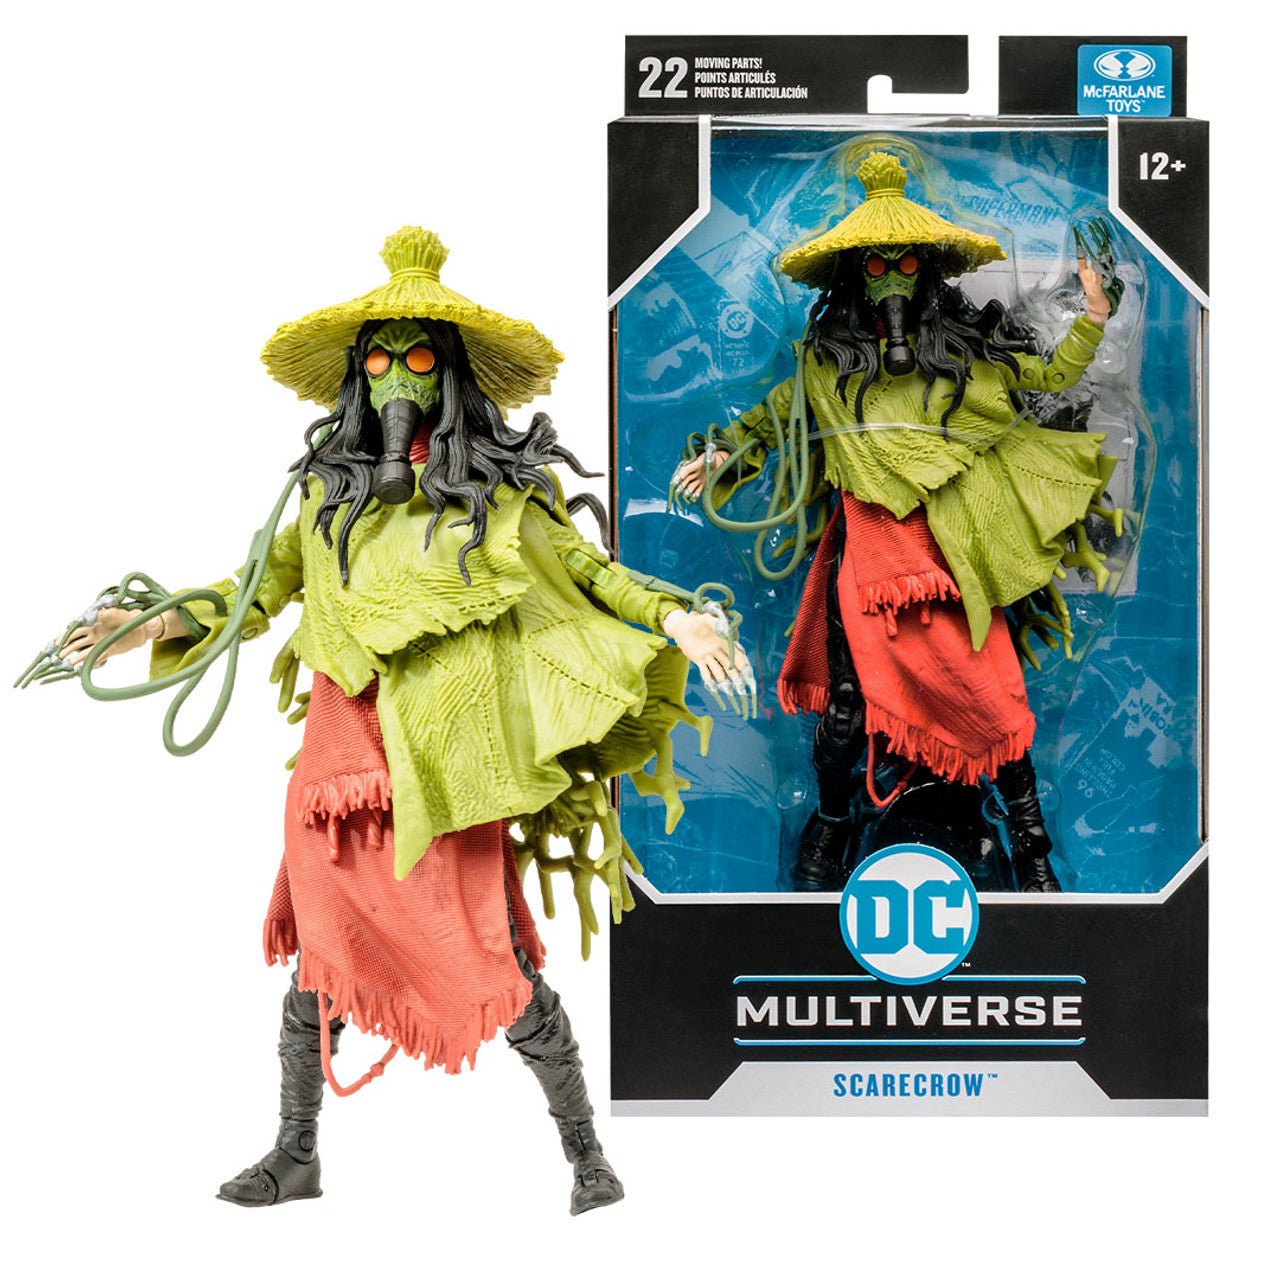 DC Multiverse - Scarecrow (Infinite Frontier) - 7-inch Action Figure by McFarlane Toys